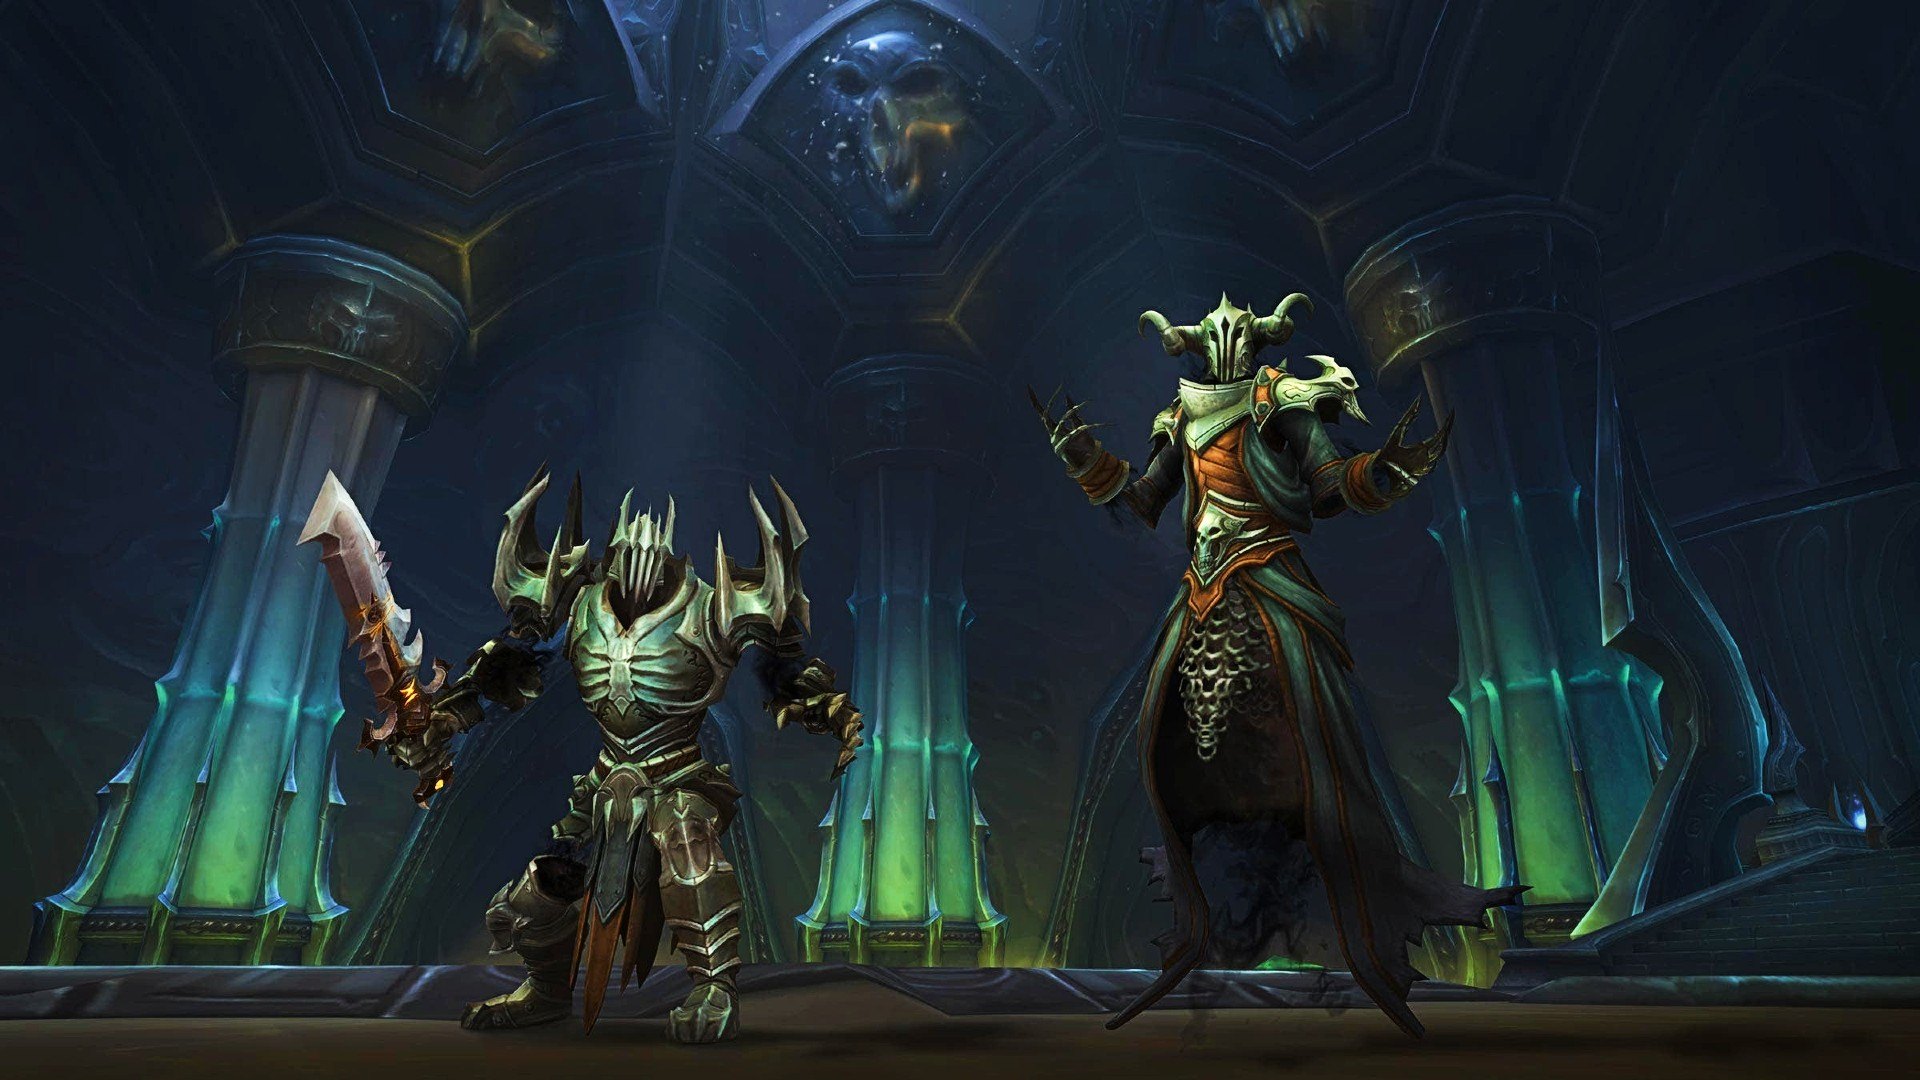 World Of Warcraft: How To Play This Multiplayer Game And The Best Tips